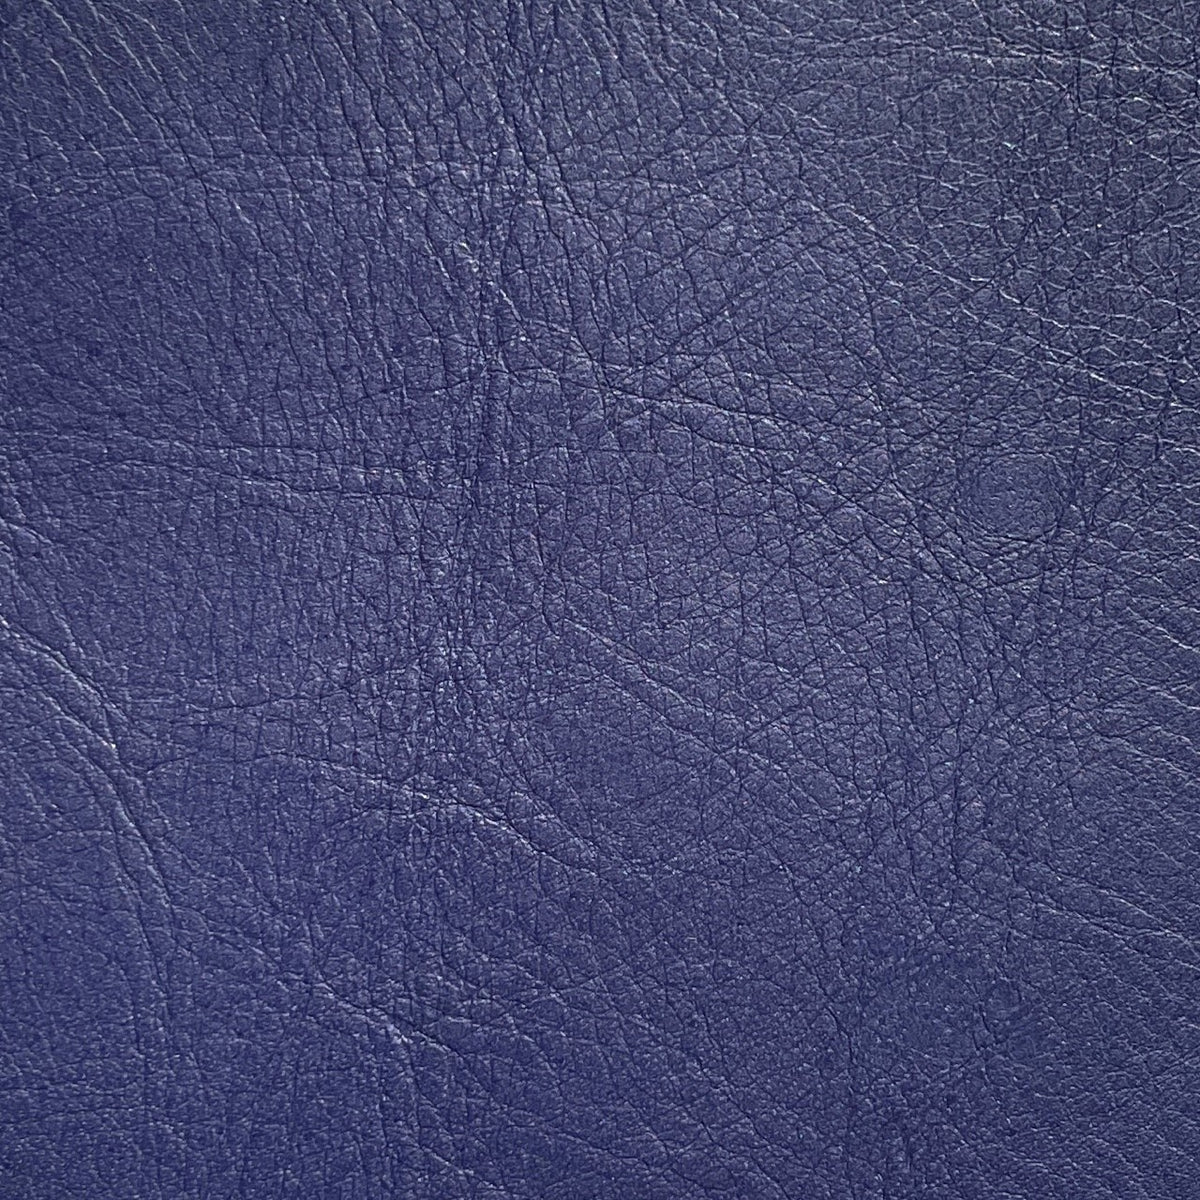 Olympia Cow Half Sides | Indigo | 1.5 mm | 10.5 sq.ft | From $160 ea.